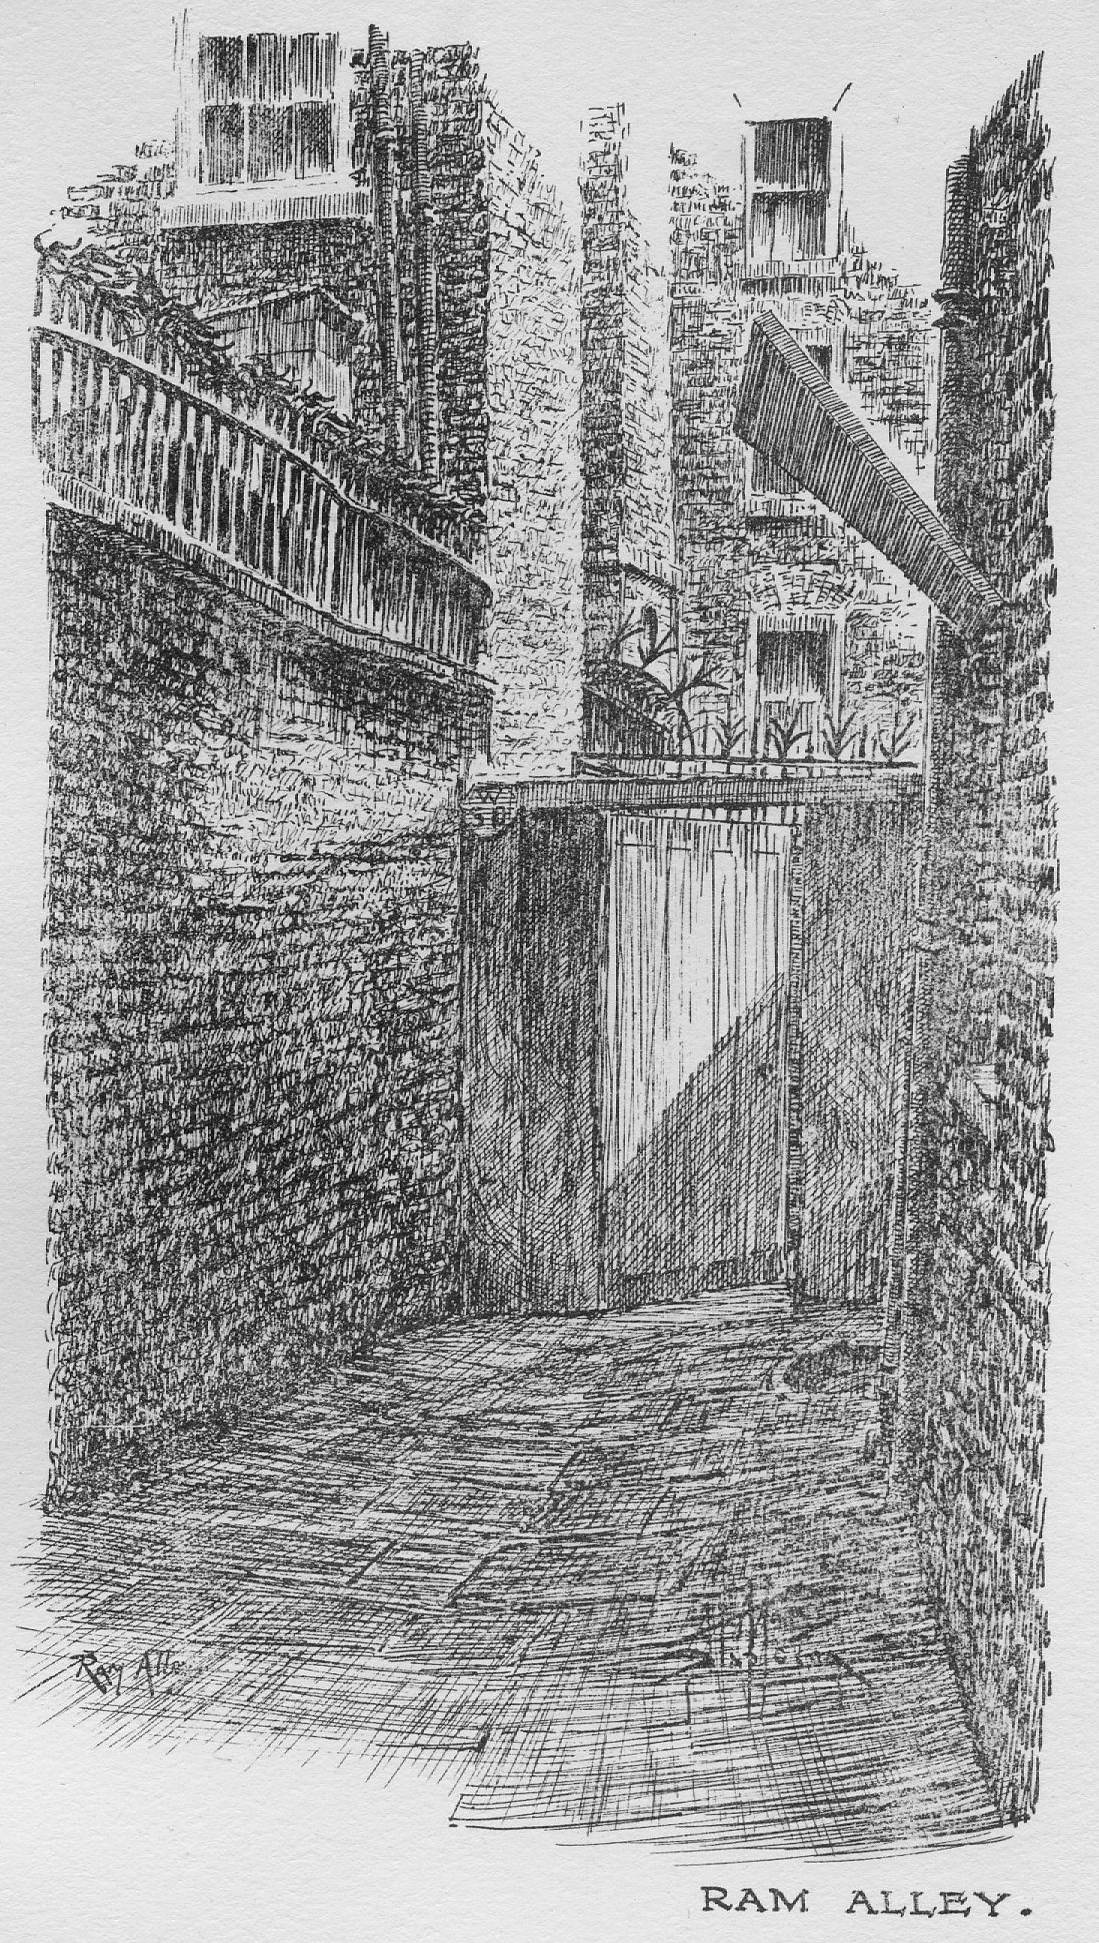 Lithograph of Ram Alley from Stapleton (1924).